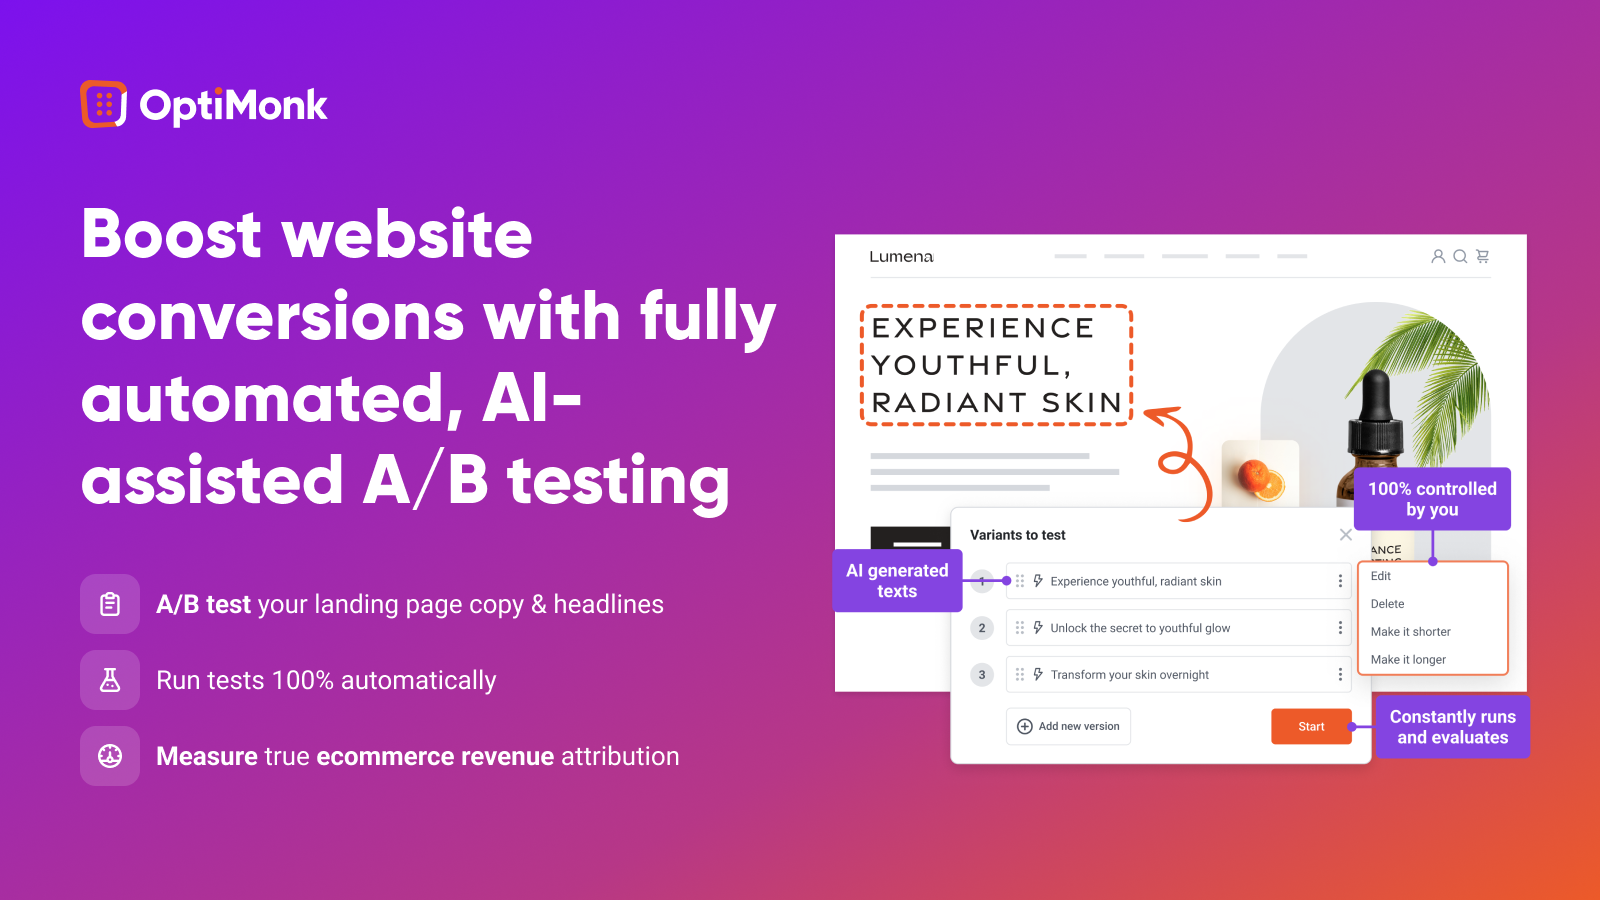 Run A/B tests easily on your headlines, product descriptions and CTAs with fully automated, AI-assisted A/B testing